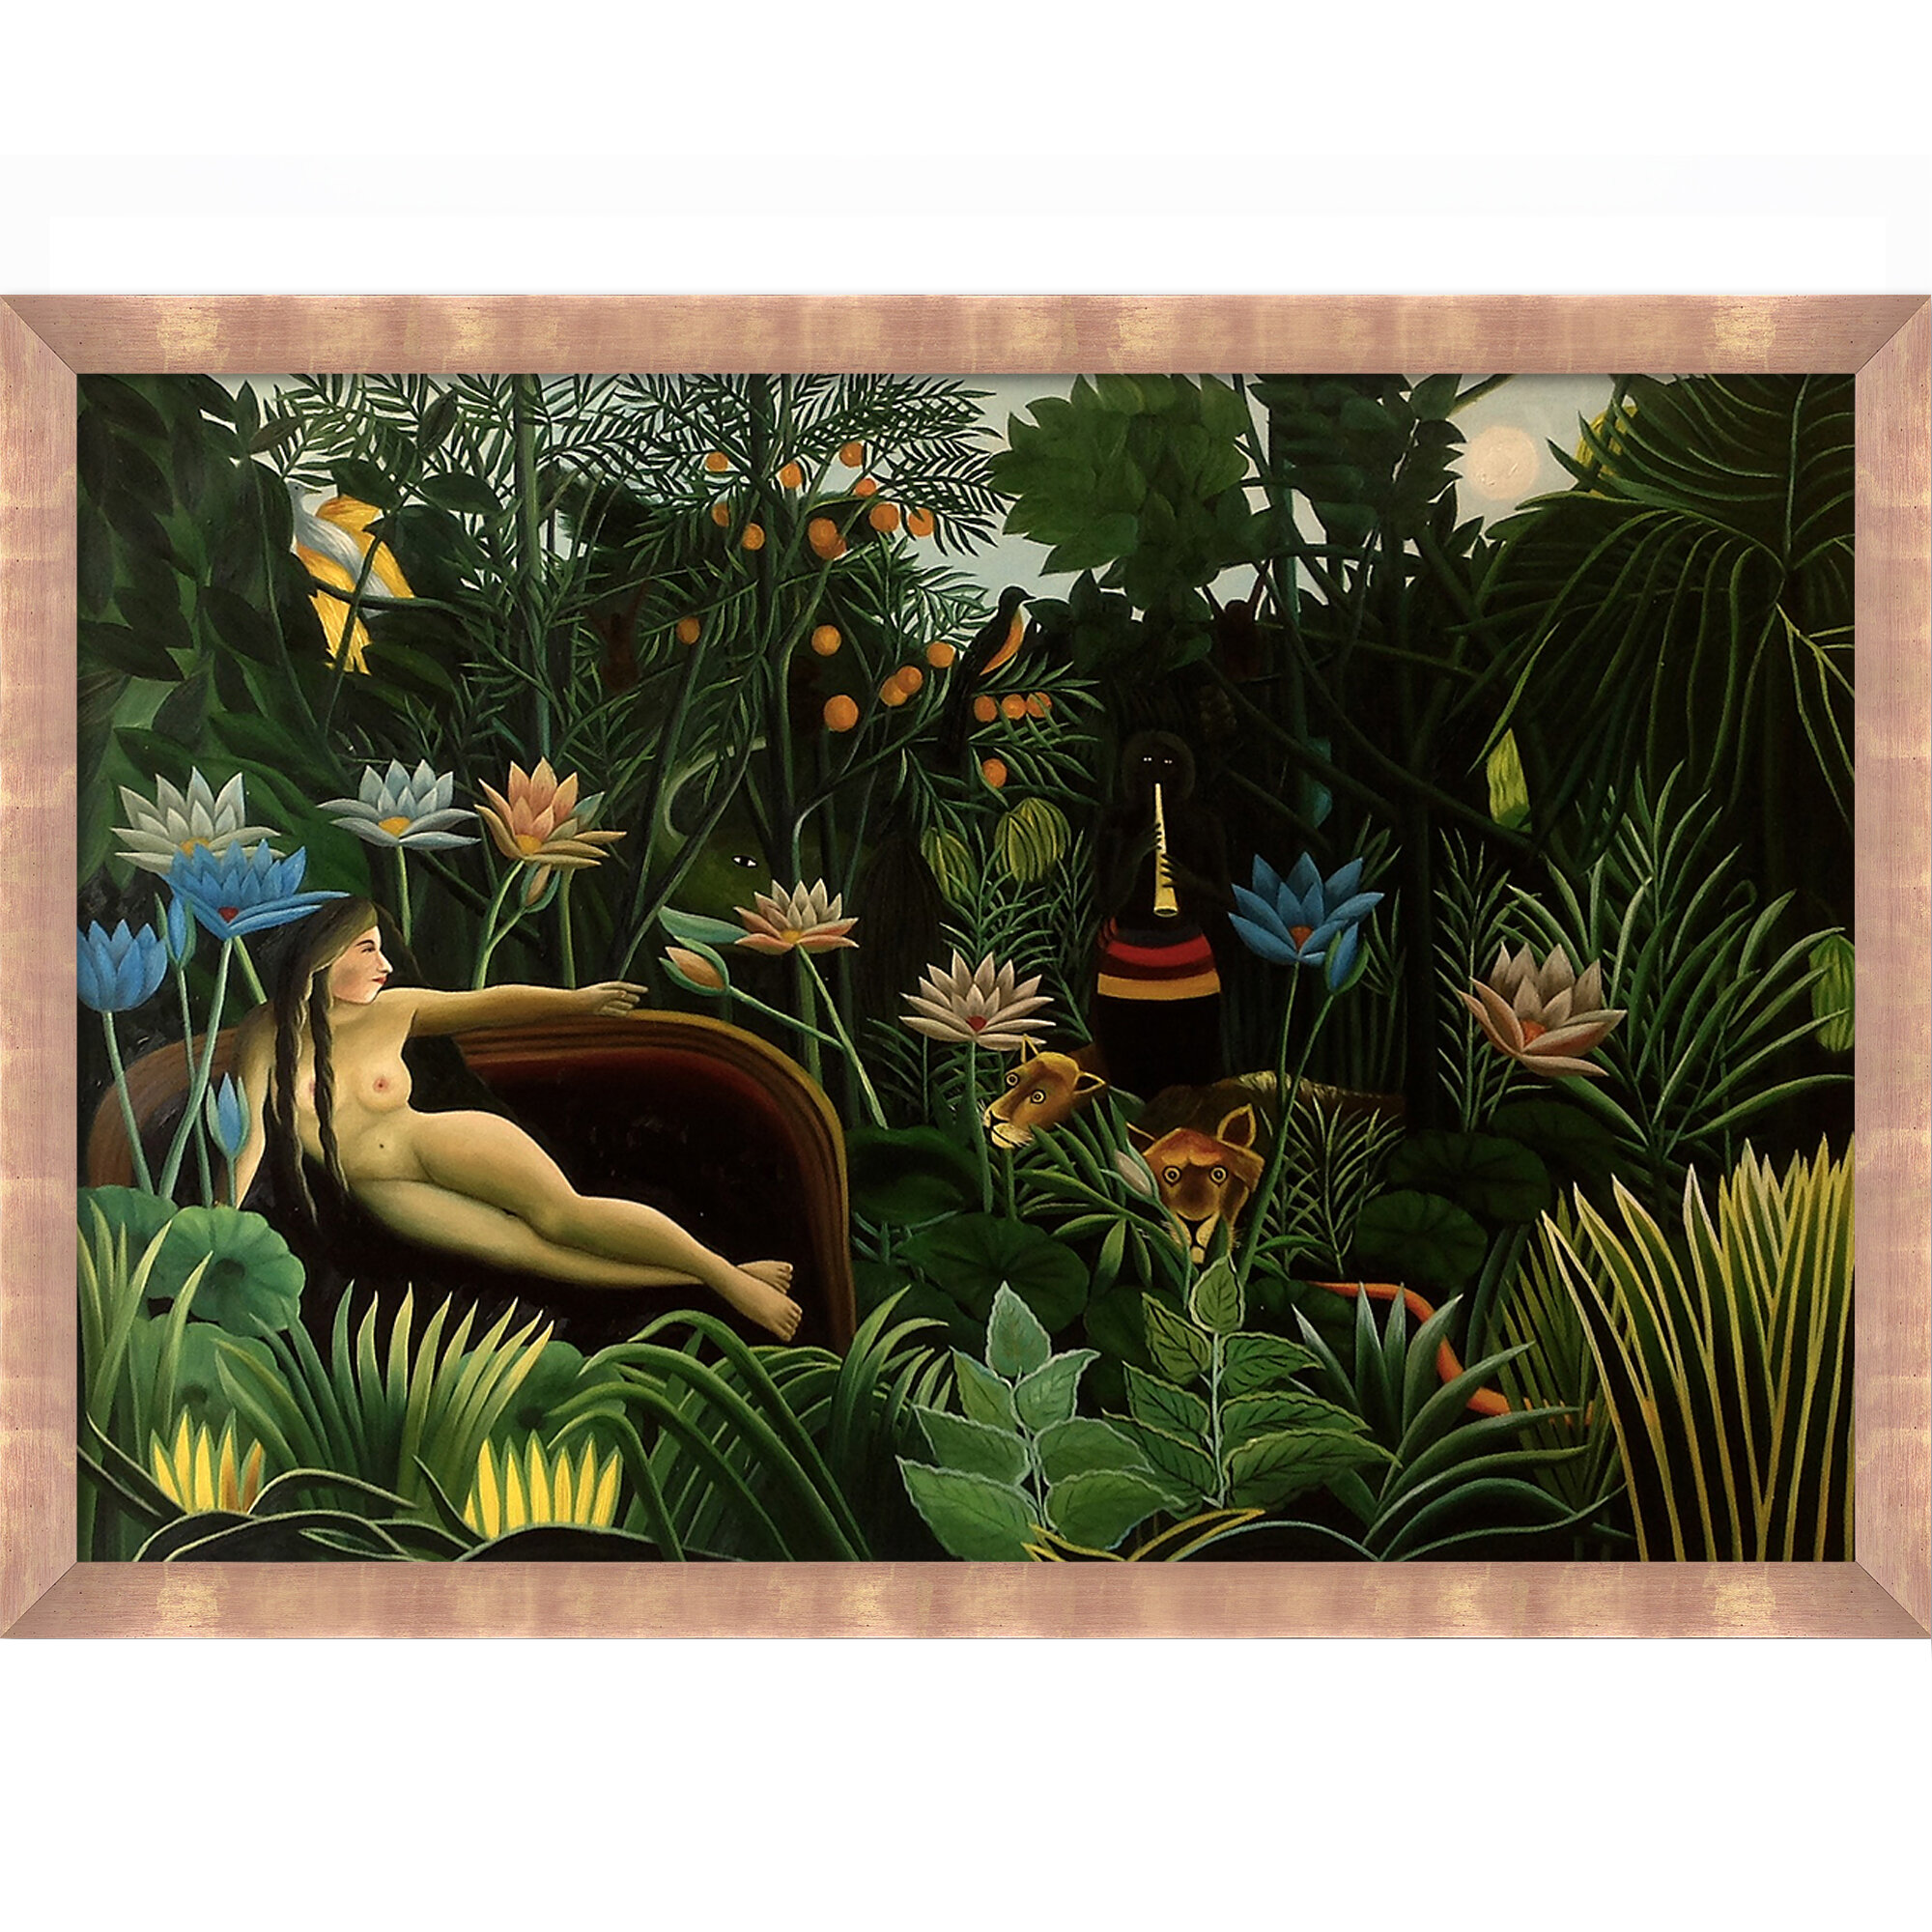 Rousseau The Dream Design Canvas Print Picture Painting Frame Home Furnishings 